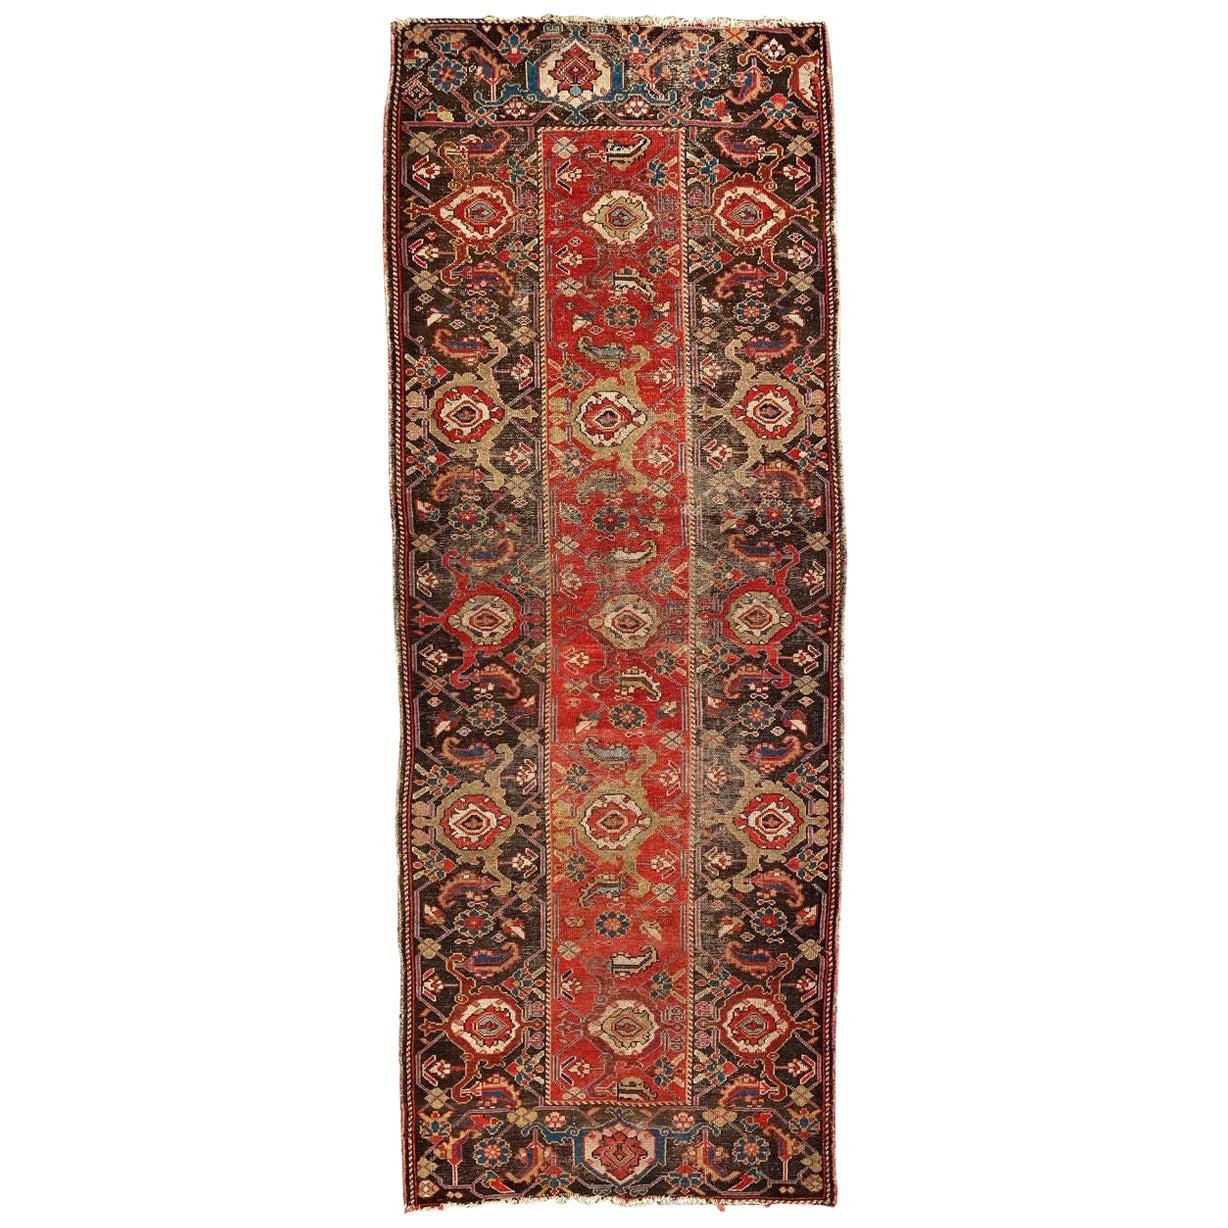 Bobyrug’s Beautiful and Rare Antique Malayer Runner